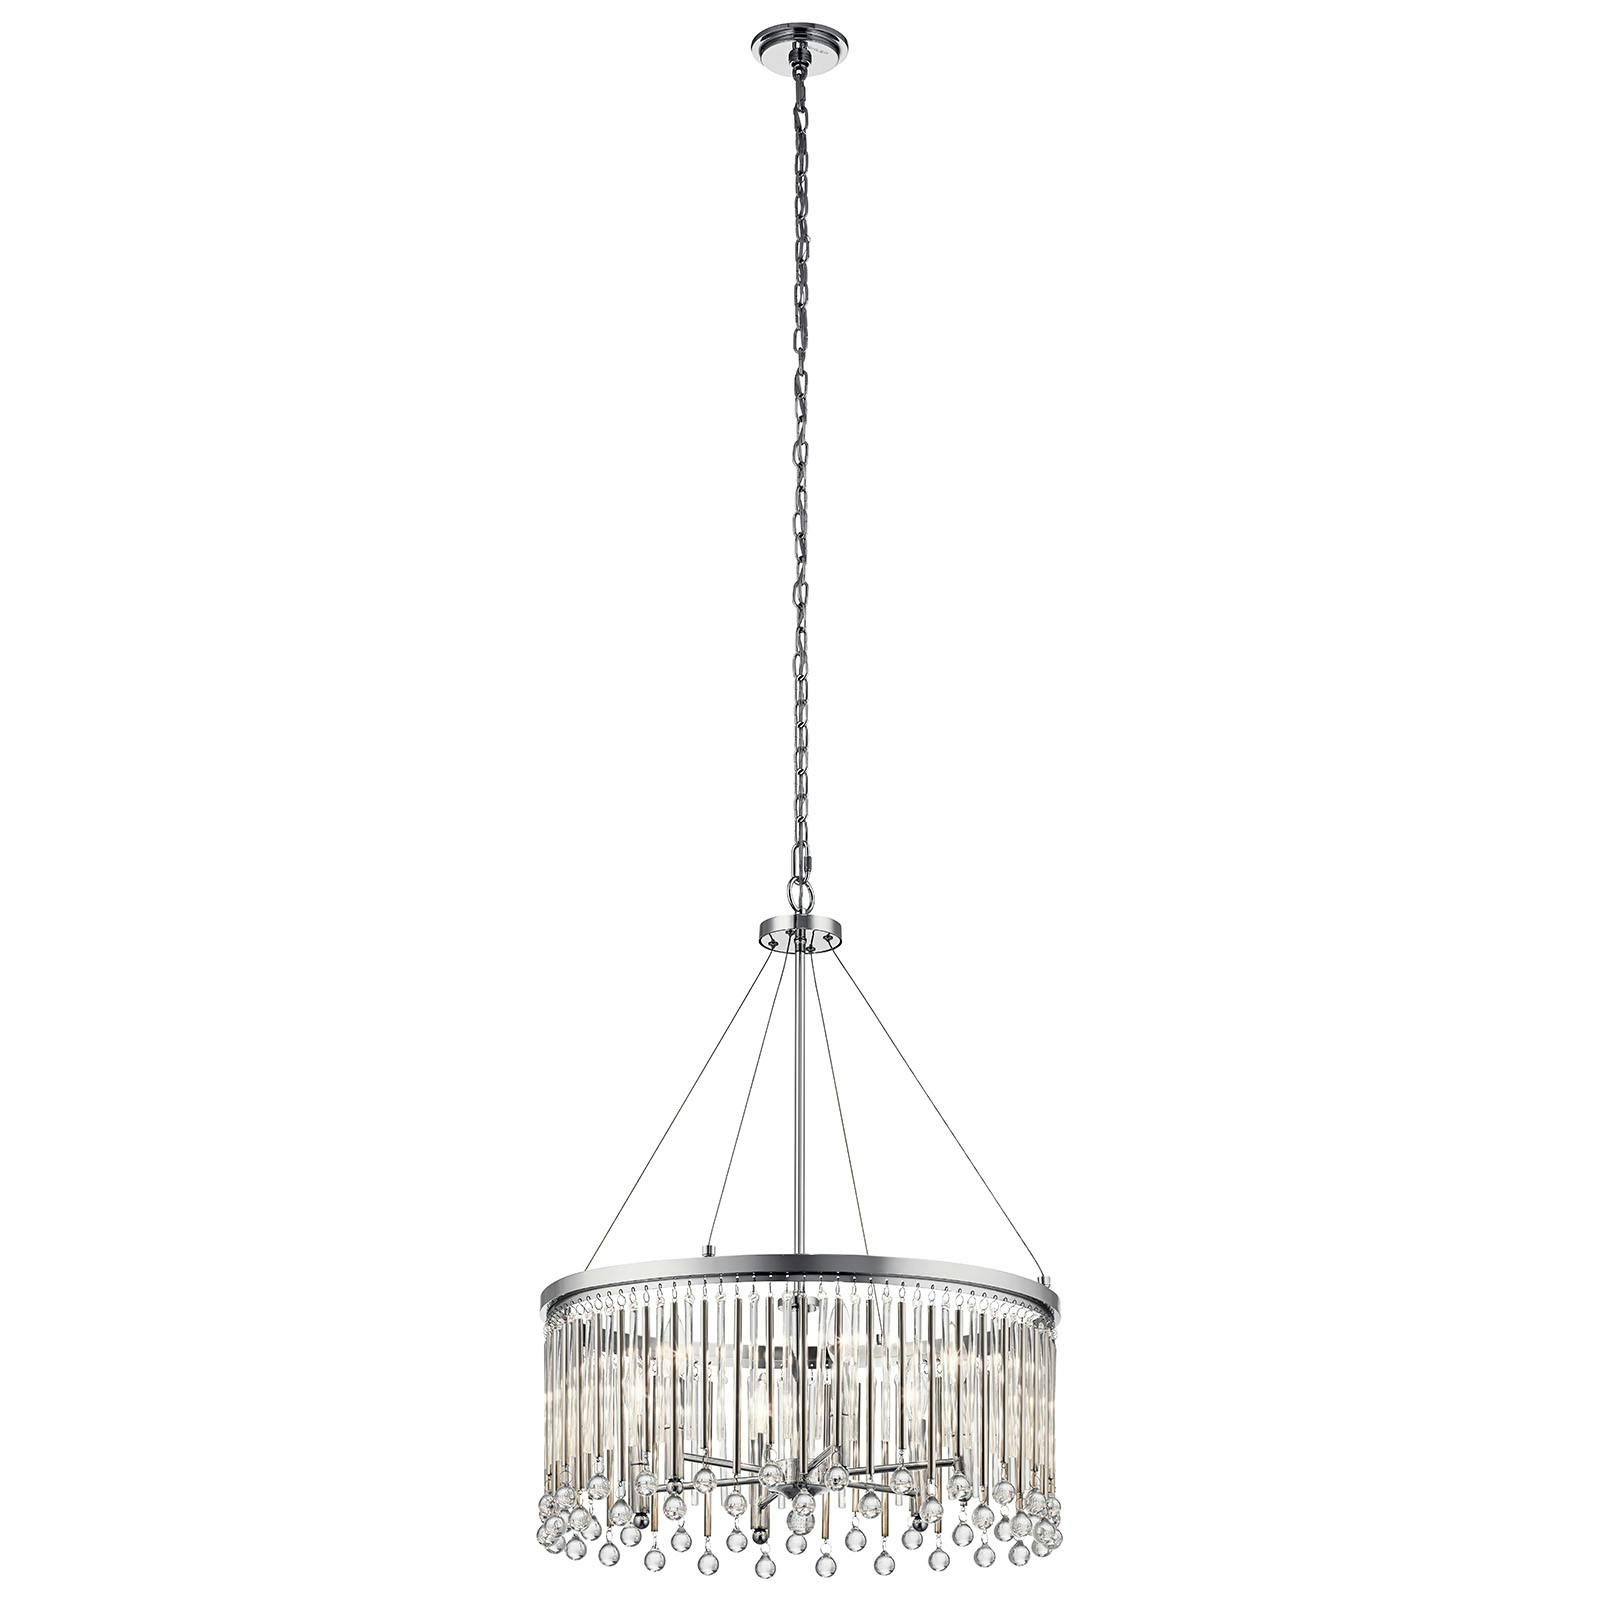 Piper 24" 6 Light Round Chandelier Chrome on a white background